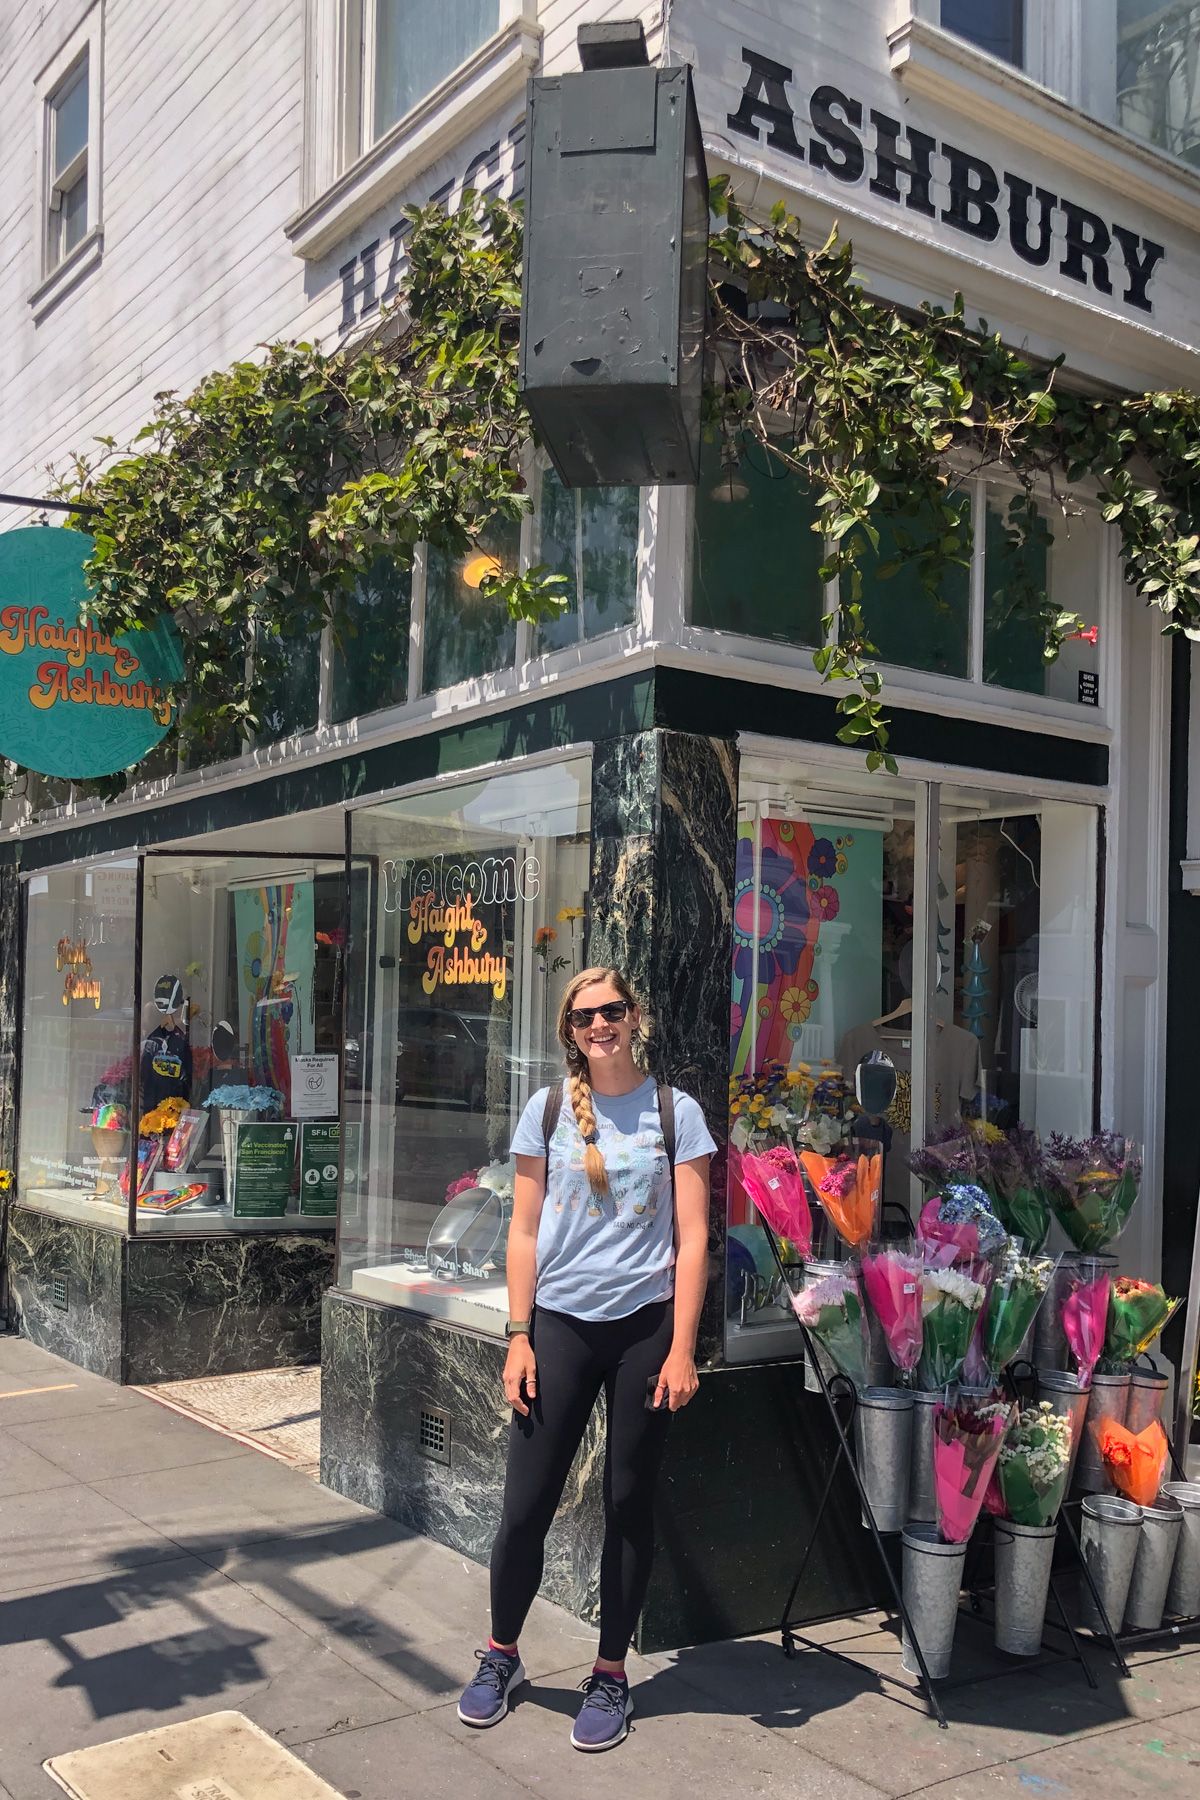 A woman in black leggings and a blue shirt stands smiling on a street corner in front of a store with a sign that says "Haight Ashbury."